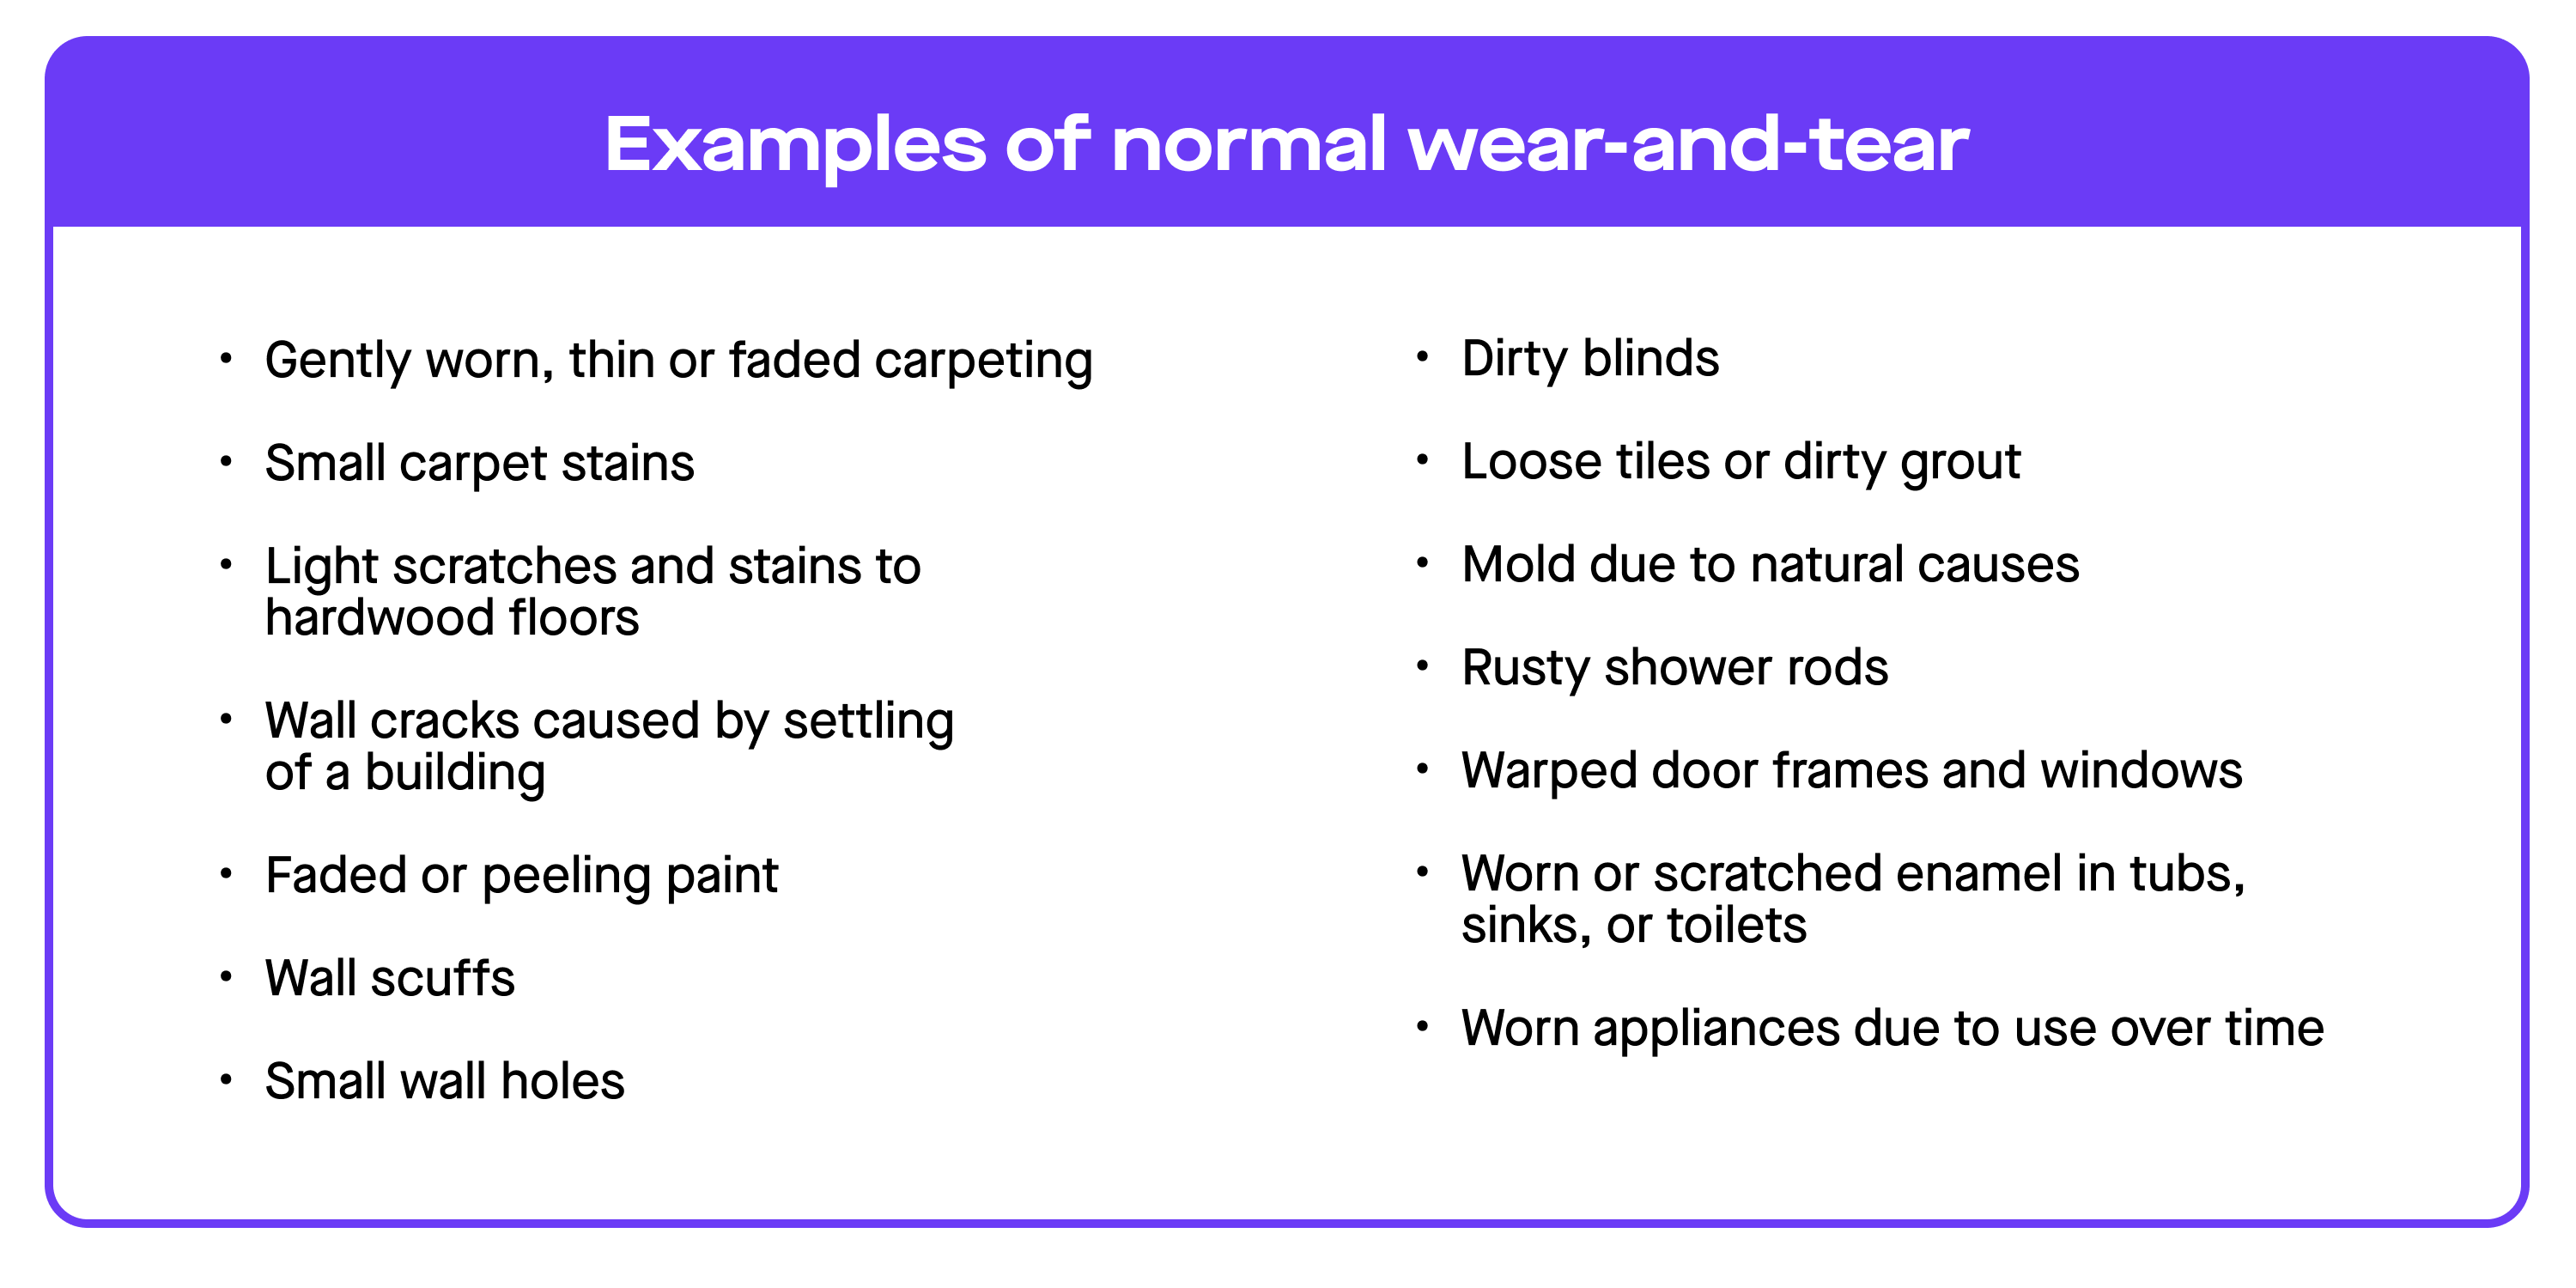 Chart listing examples of normal wear-and-tear